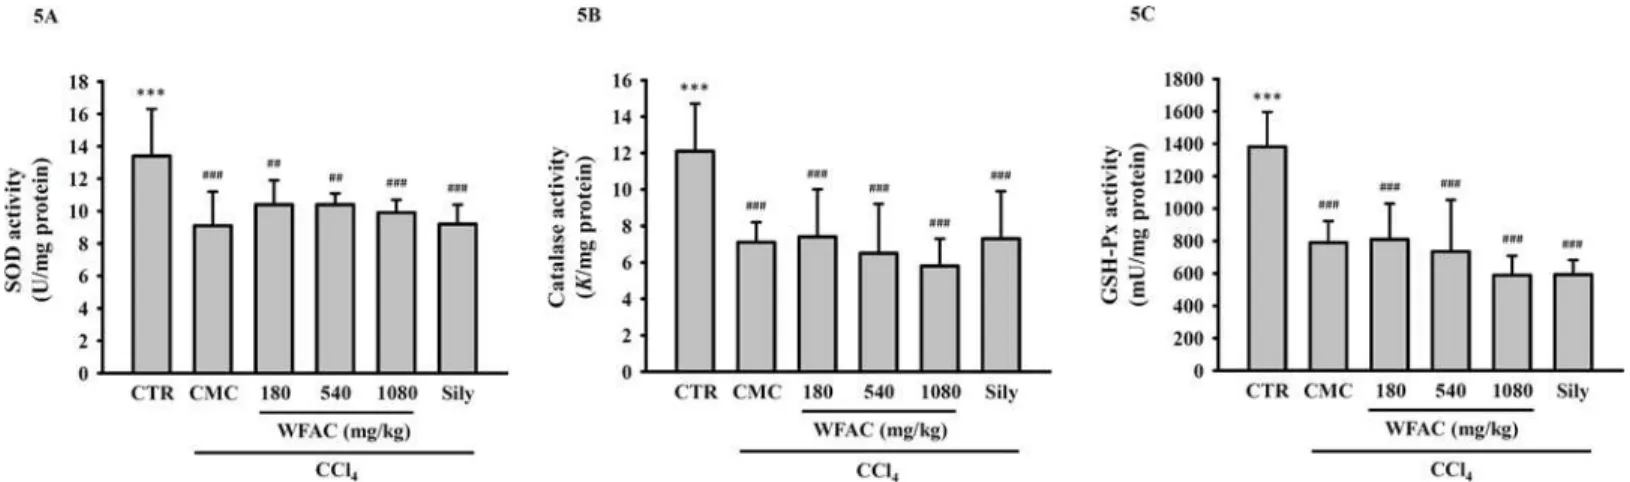 Fig 5. Effect of WFAC on hepatic SOD, catalase and GSH-Px activities in CCl 4 -intoxicated rat